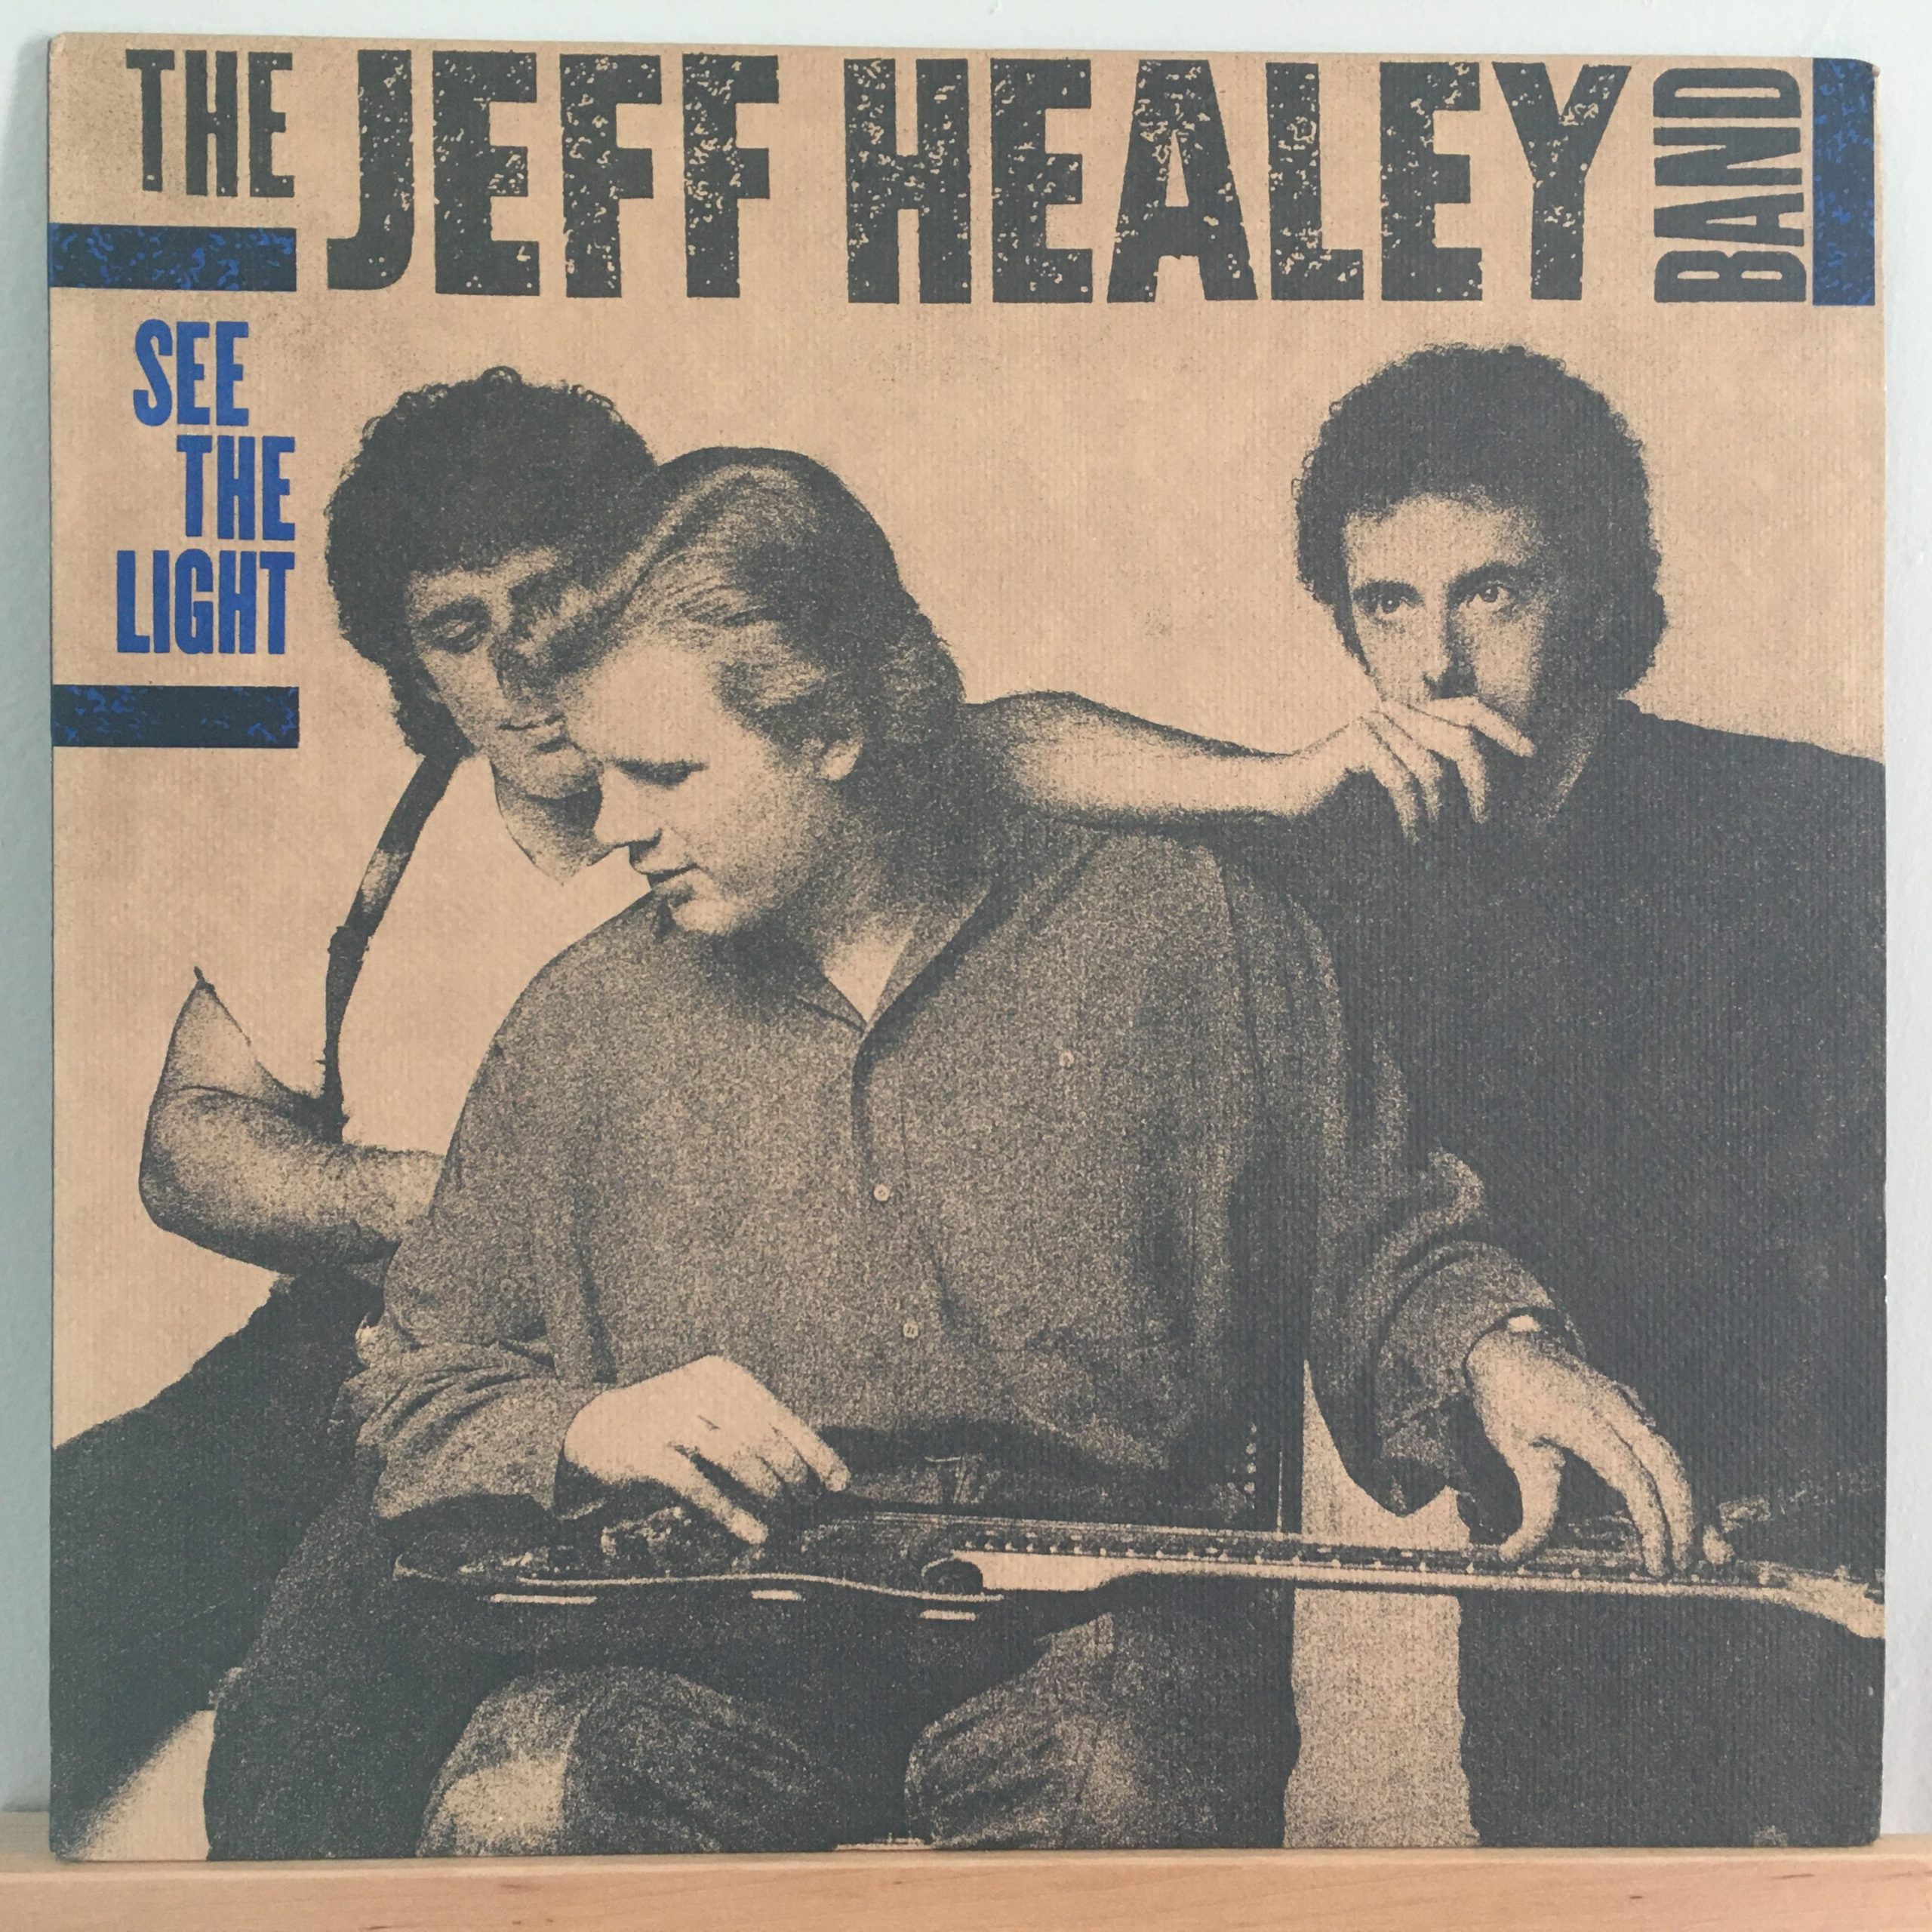 The Jeff Healey Band See The Light Vinyl Distractions